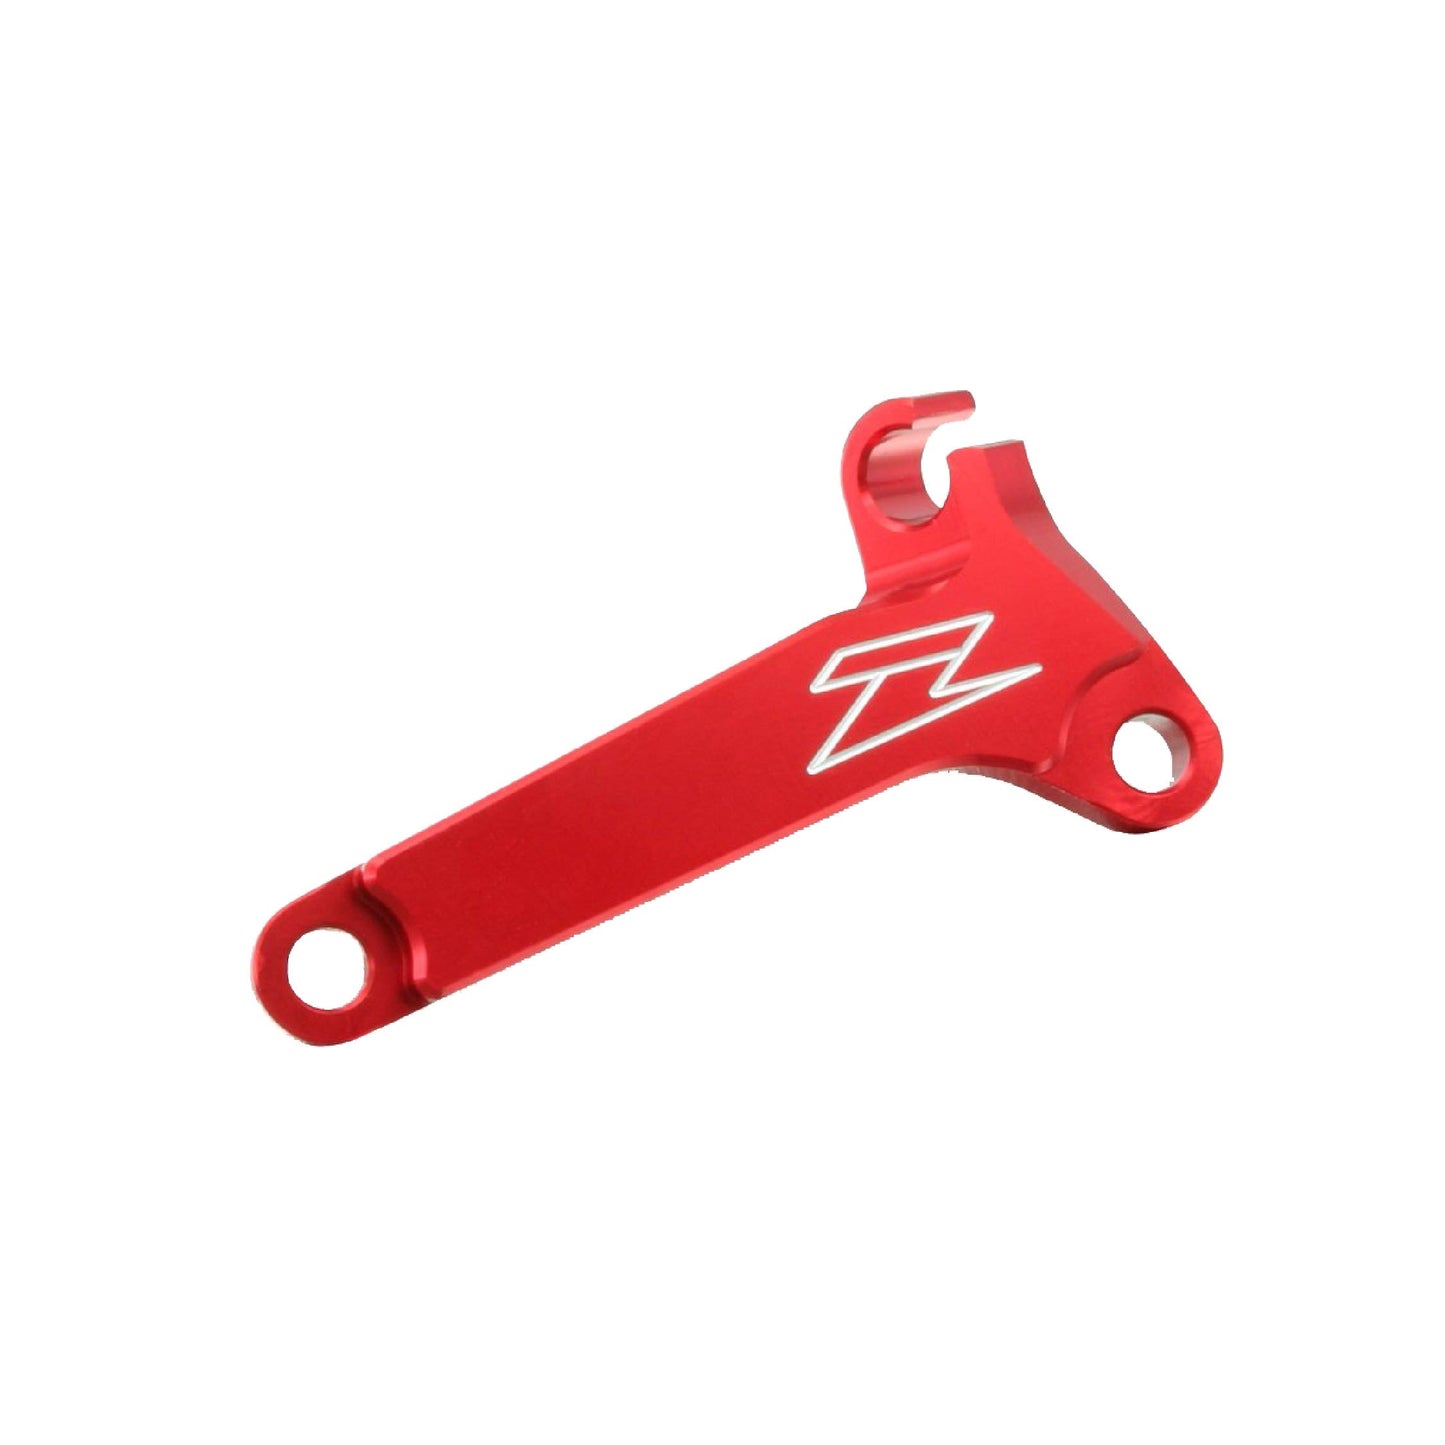 Zeta Clutch Cable Guide CRF450R '09 Red